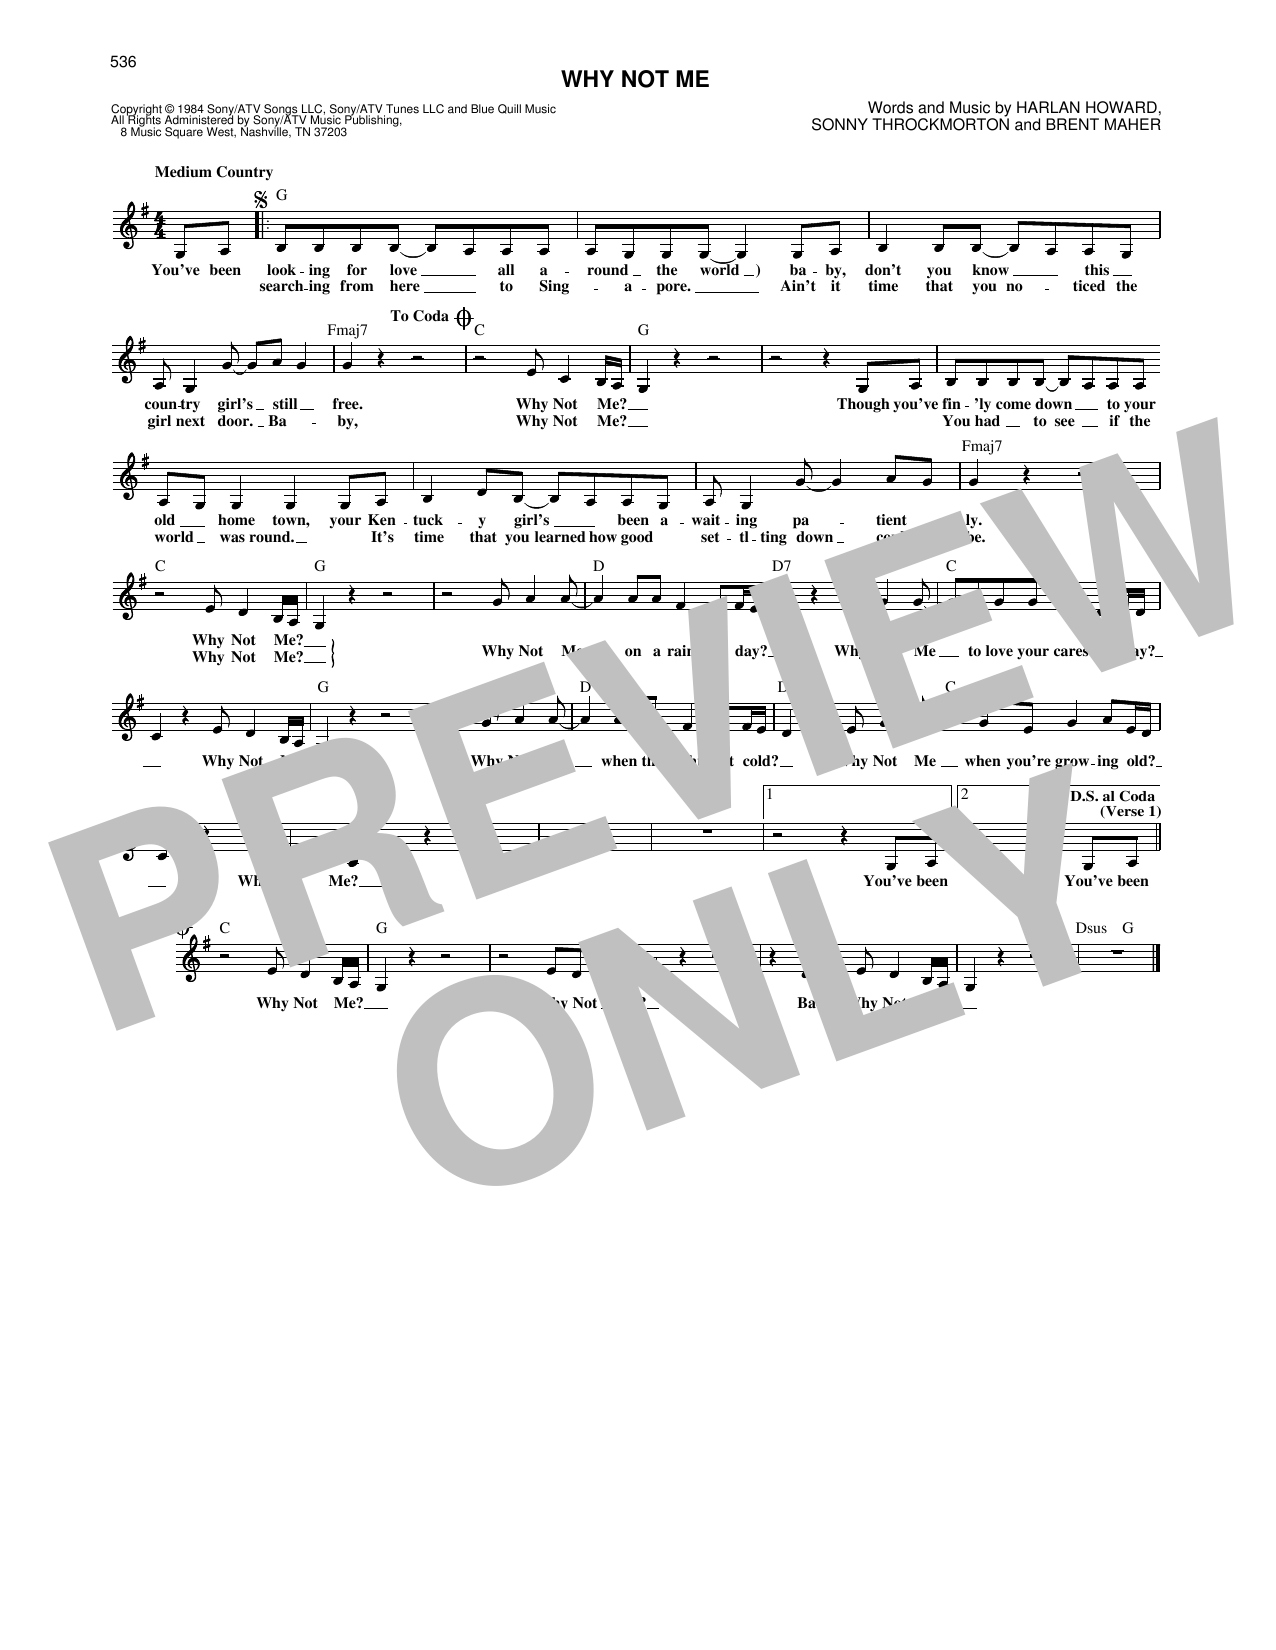 Download The Judds Why Not Me Sheet Music